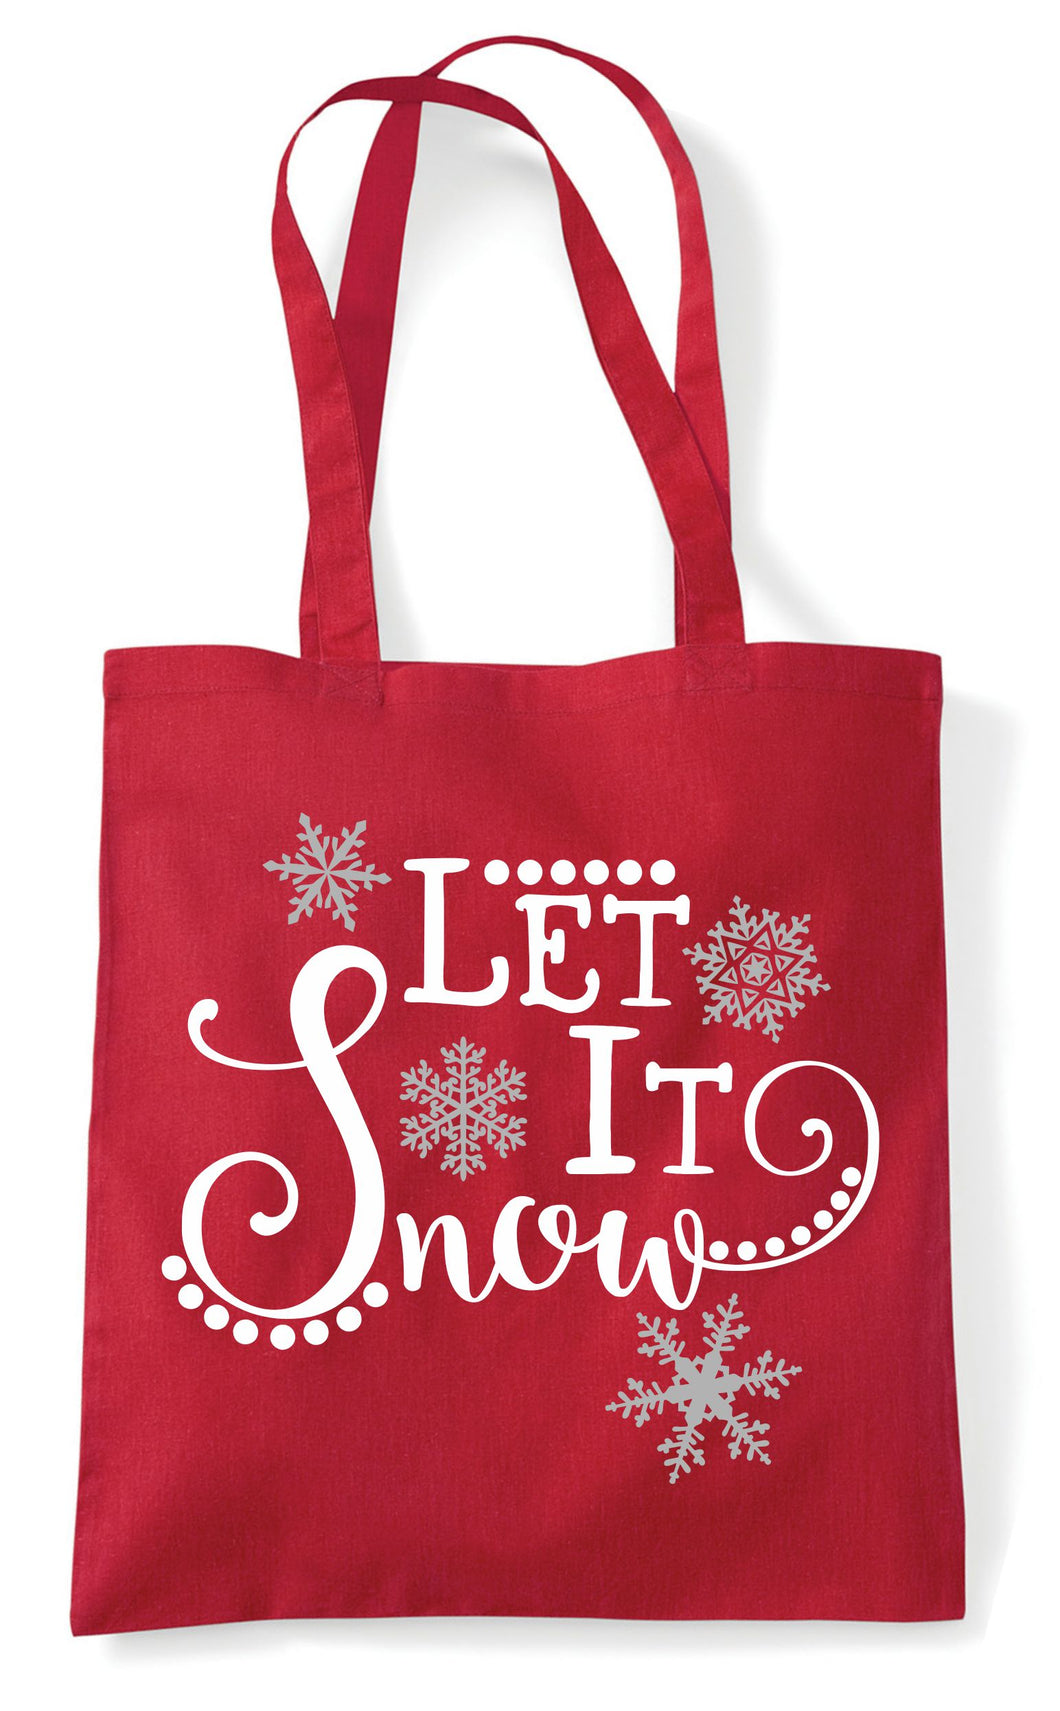 Christmas Tote Bag (Let it Snow)